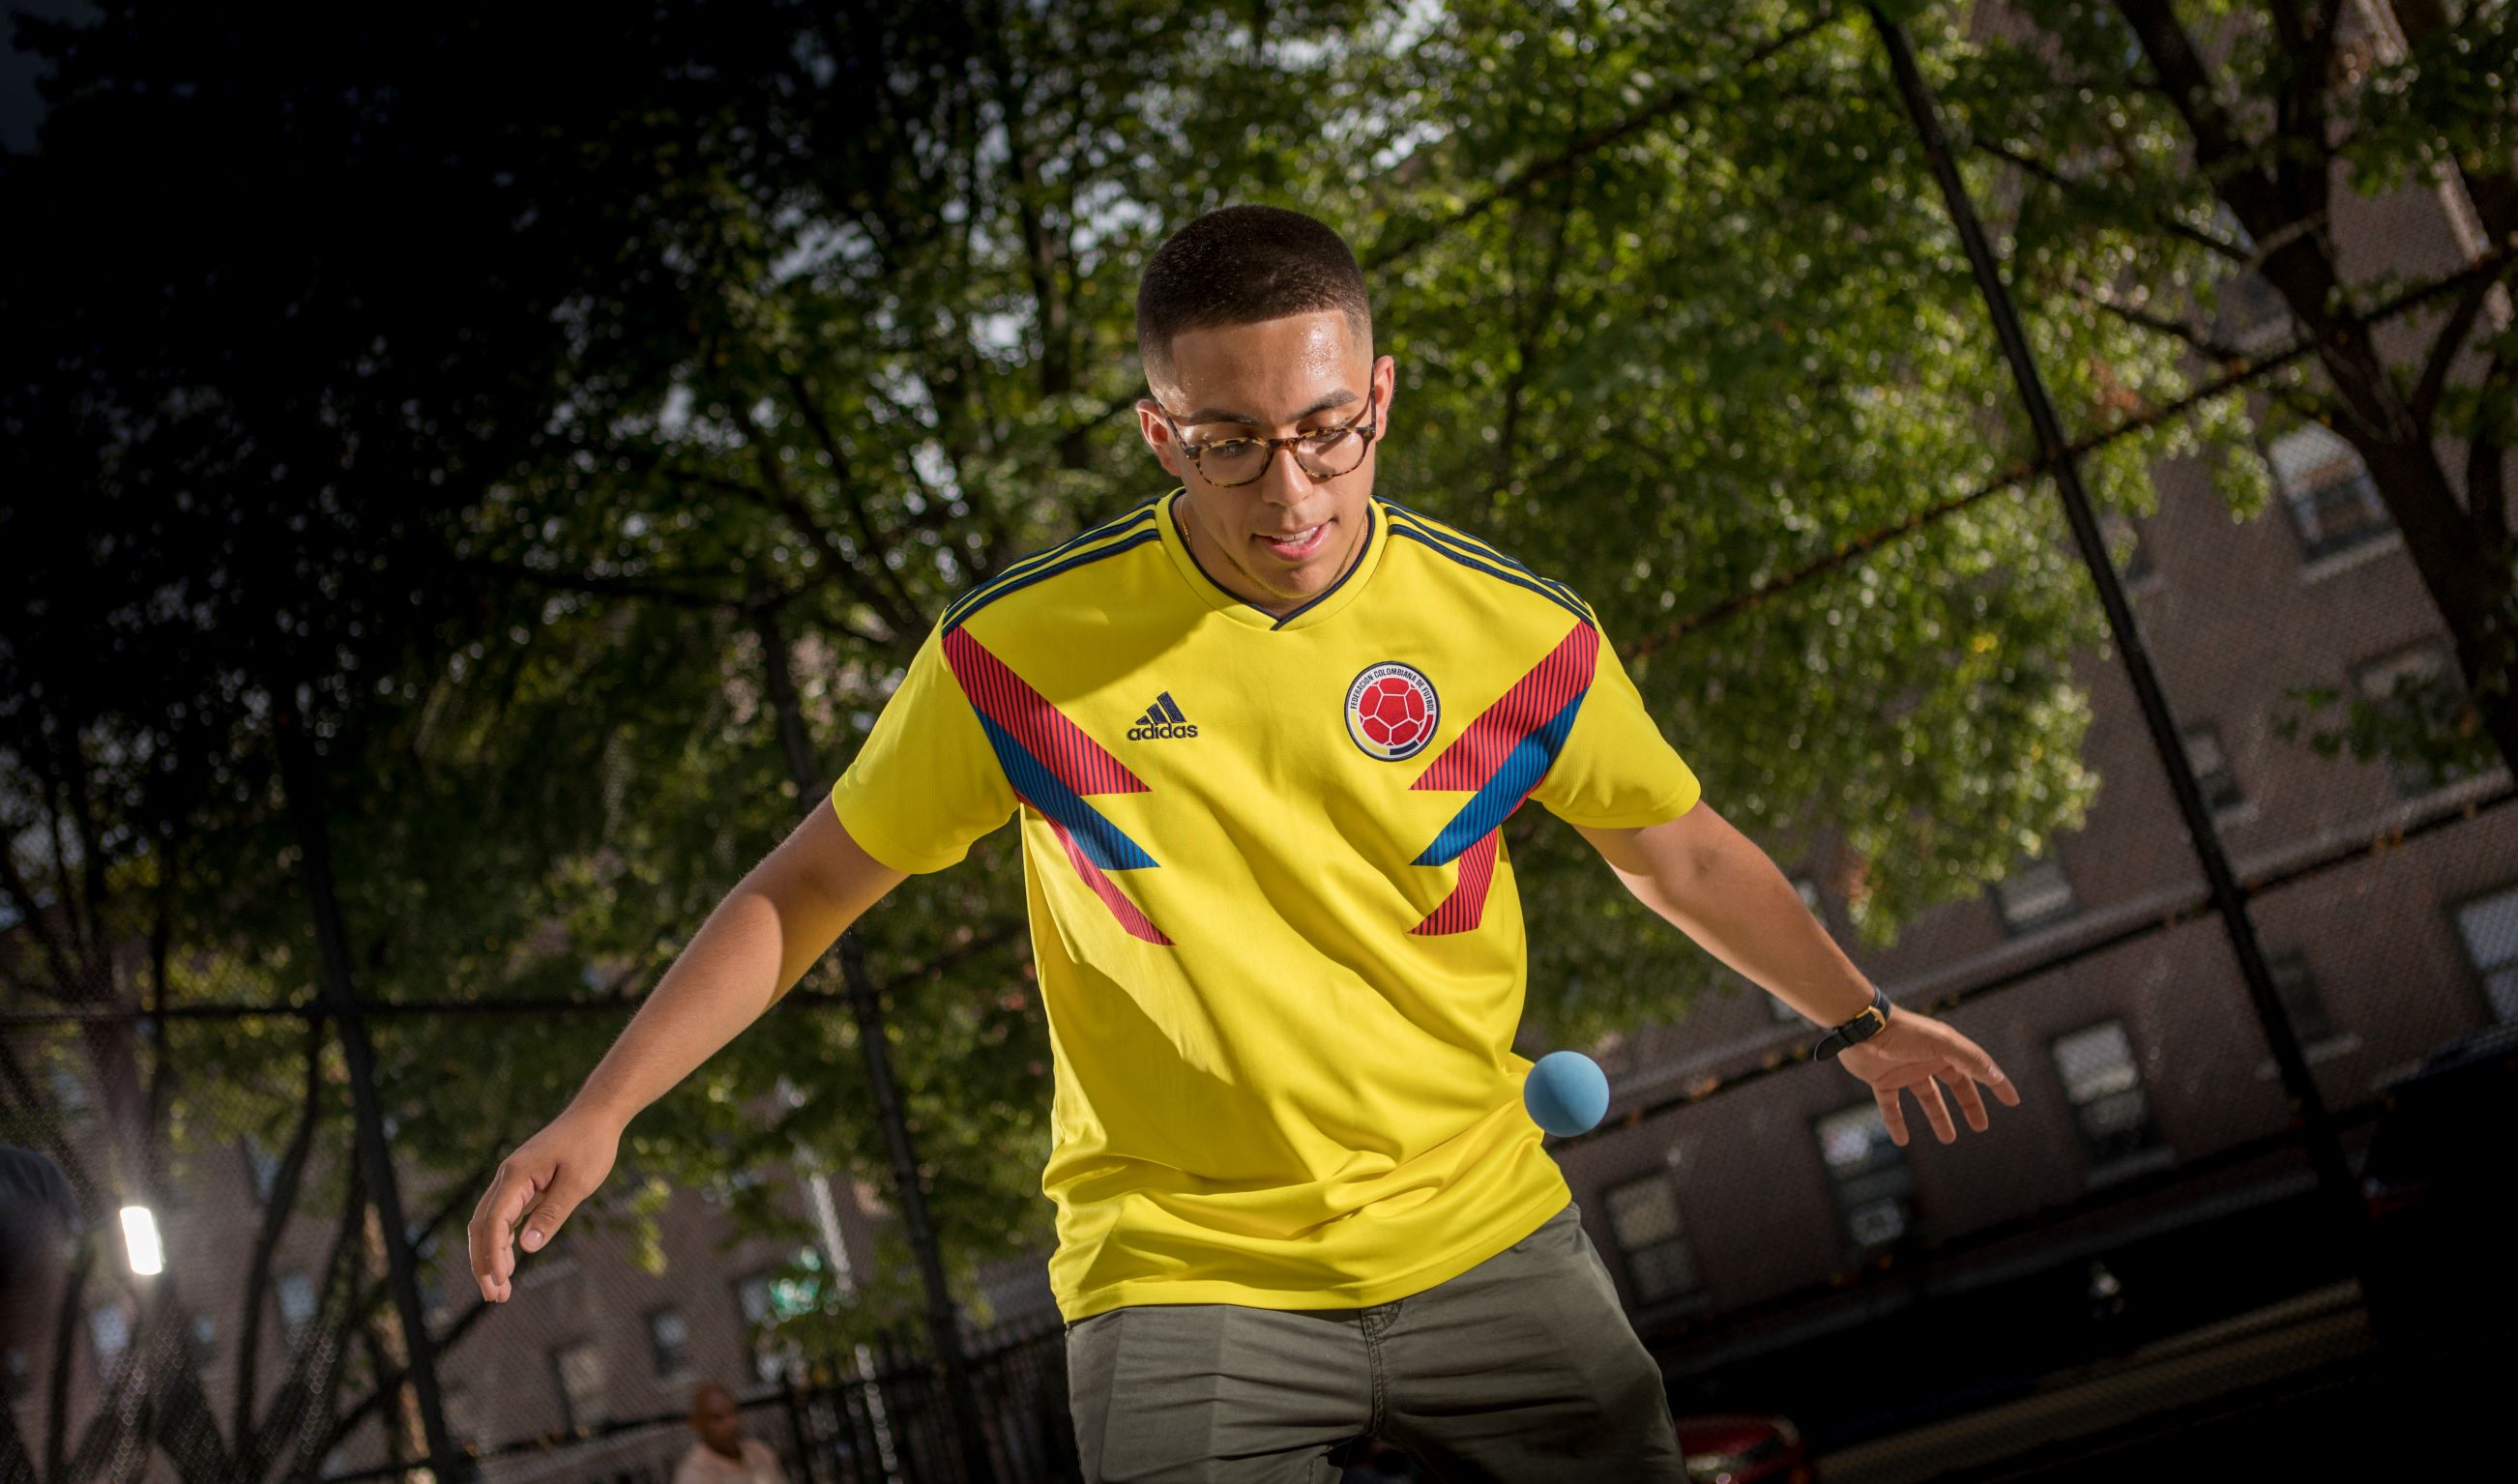 Julio Salas developed his drive and determination to do better on New York City handball courts.